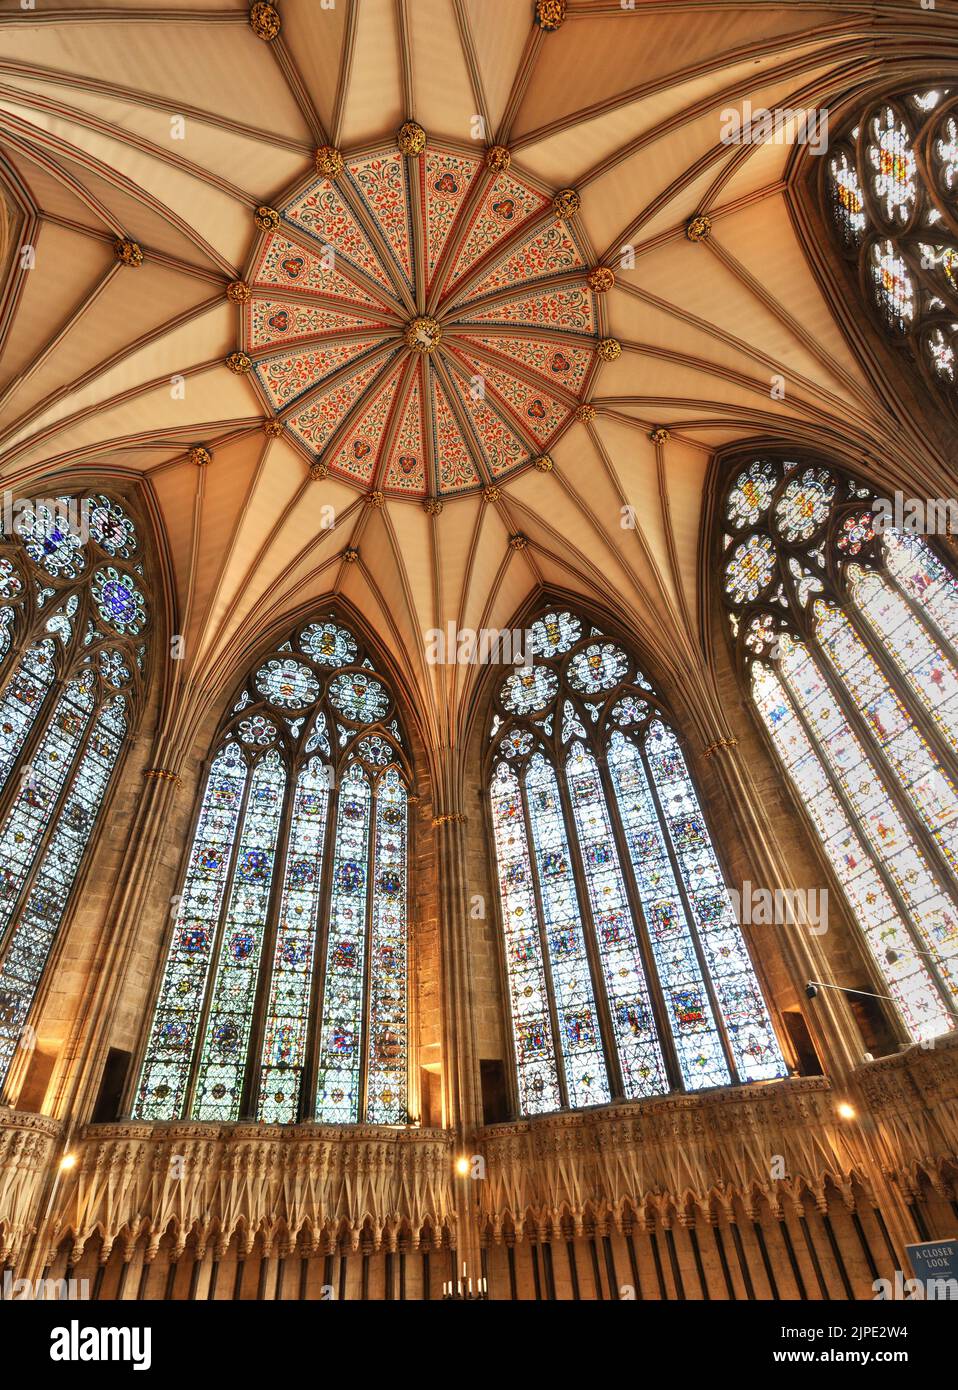 York Minster Chapter House, showing amazing ceiling and stained glass windows Stock Photo